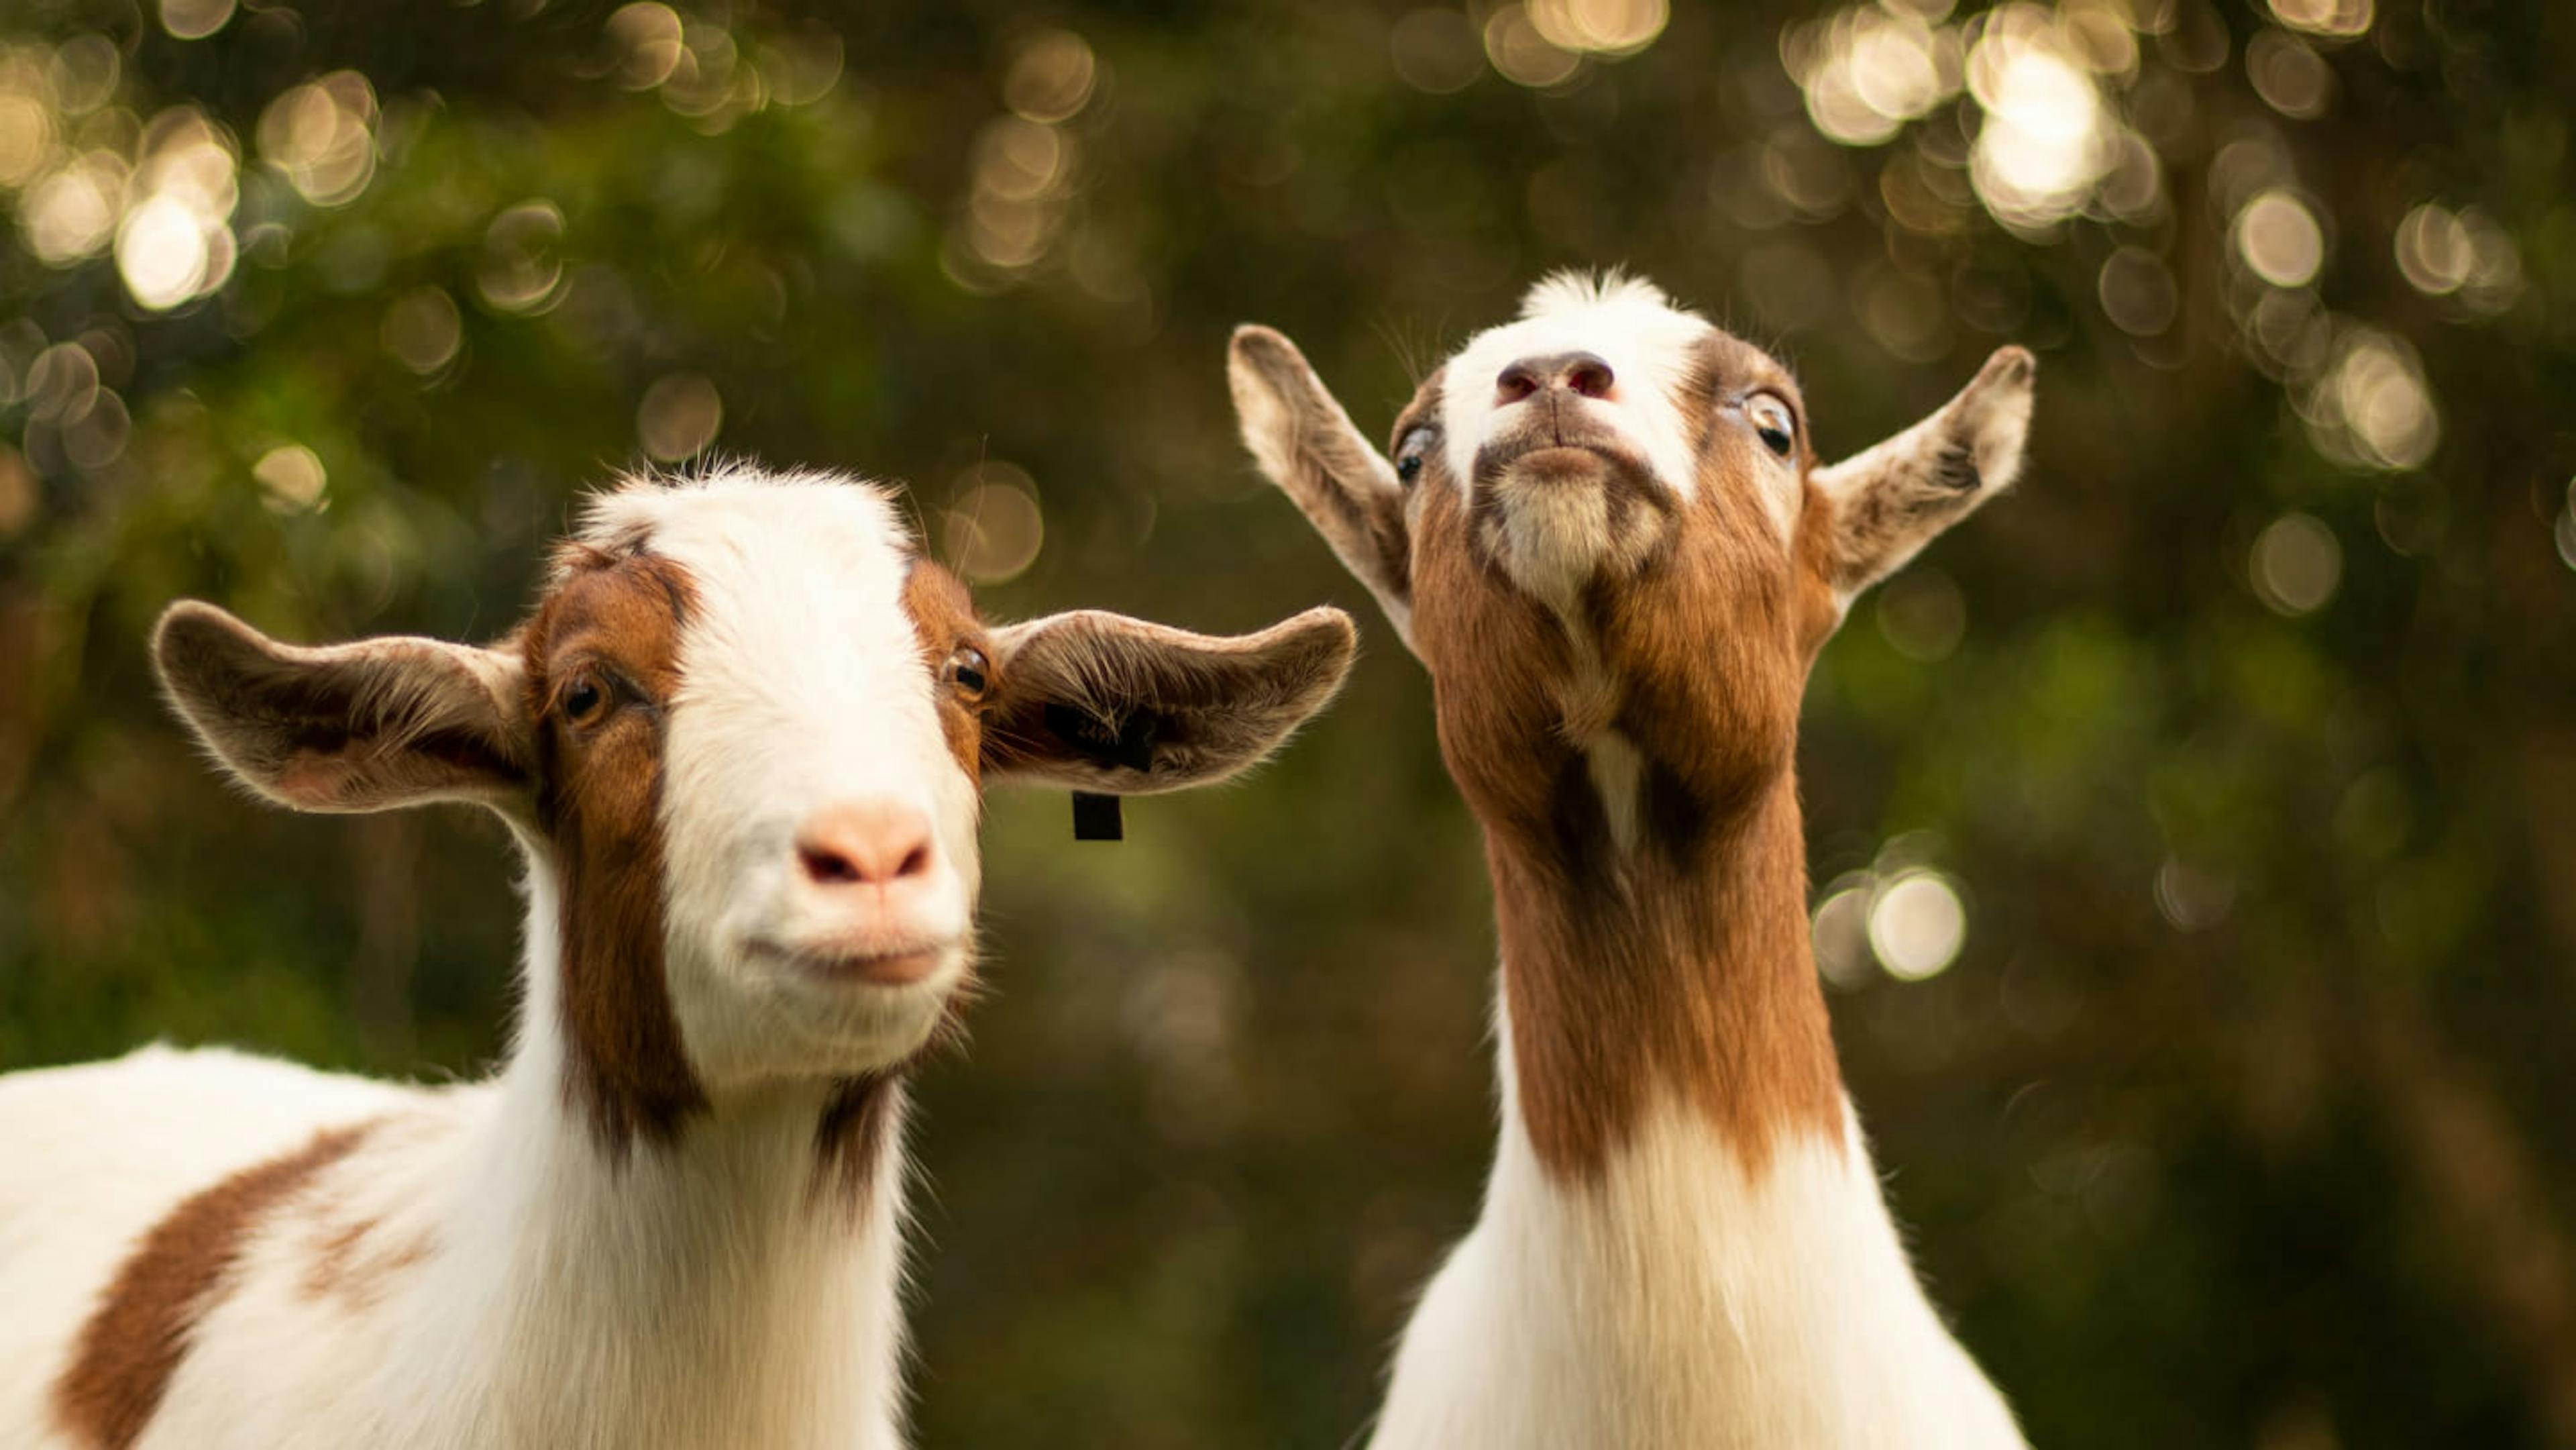 Two goats mugging for the camera.